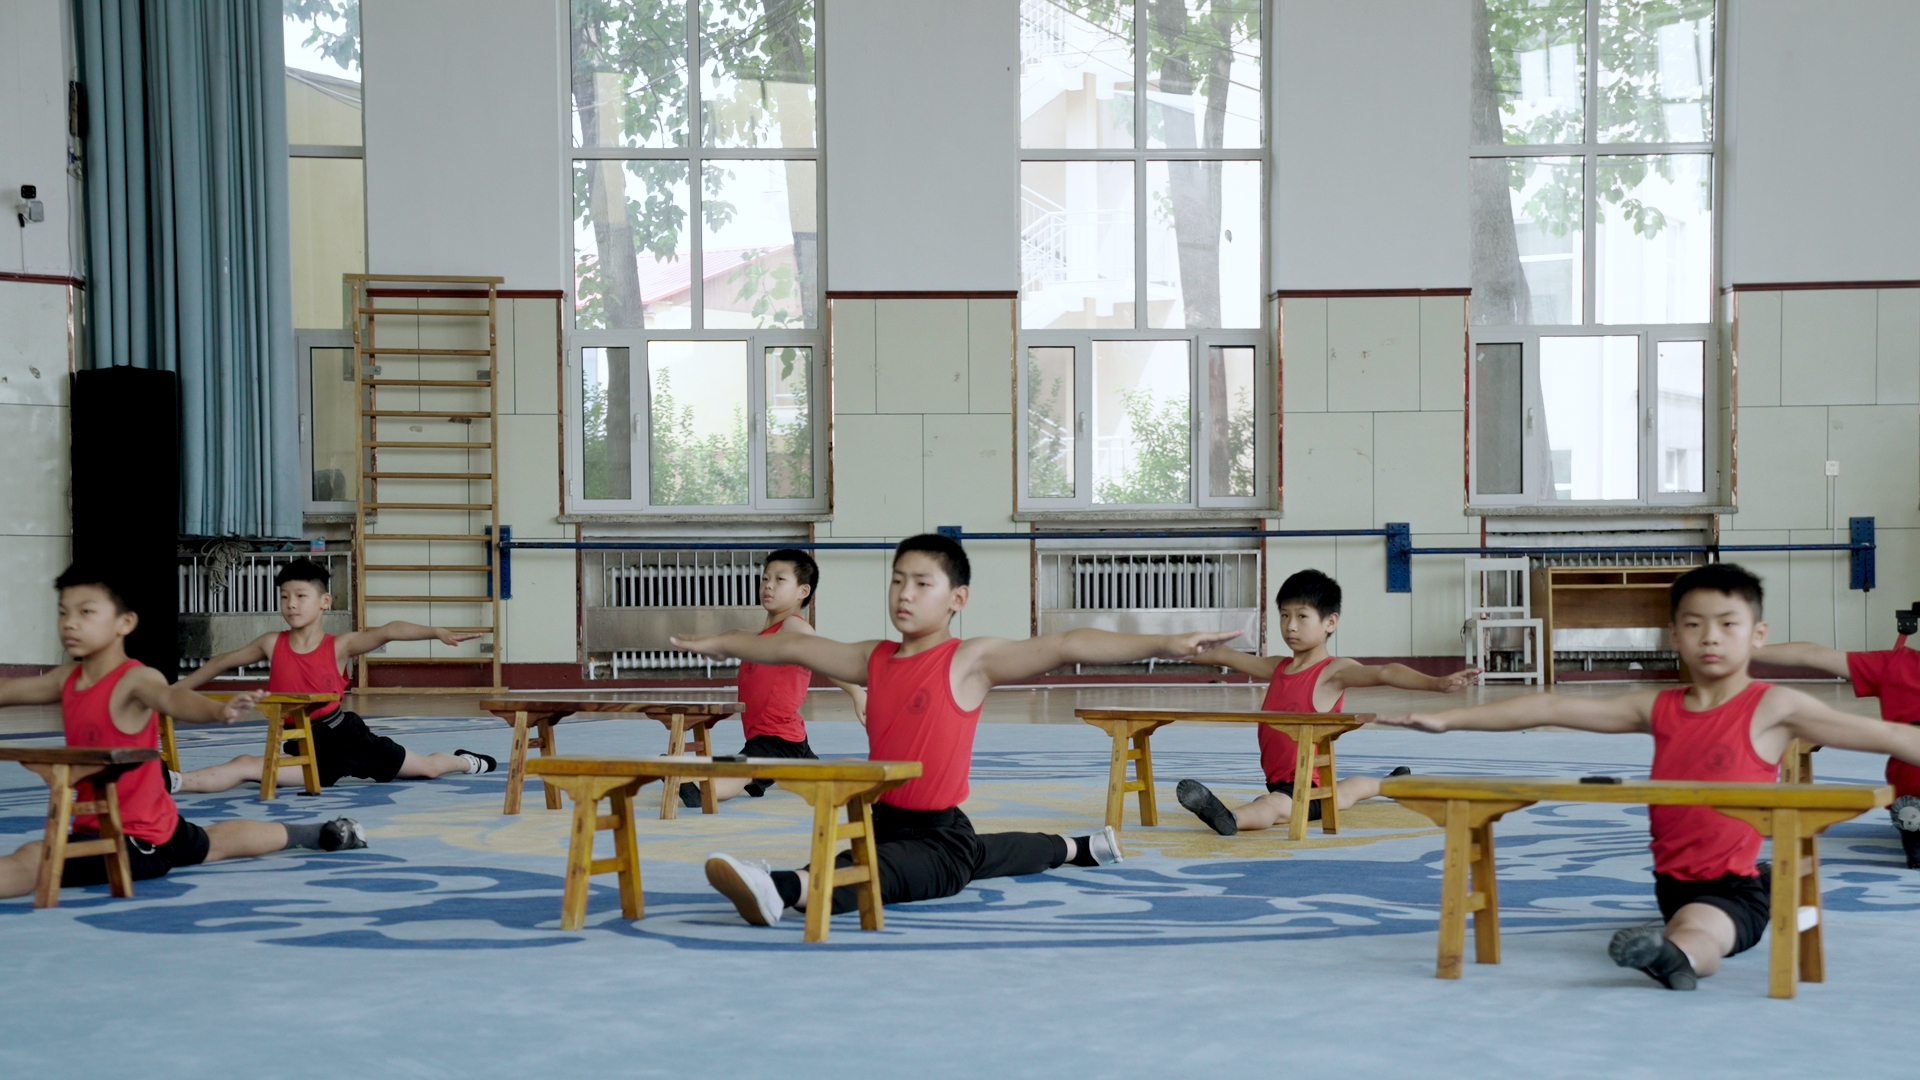 Zhang Hao (center) trains together with his peers in Cangzhou, north China's Hebei Province. /CGTN